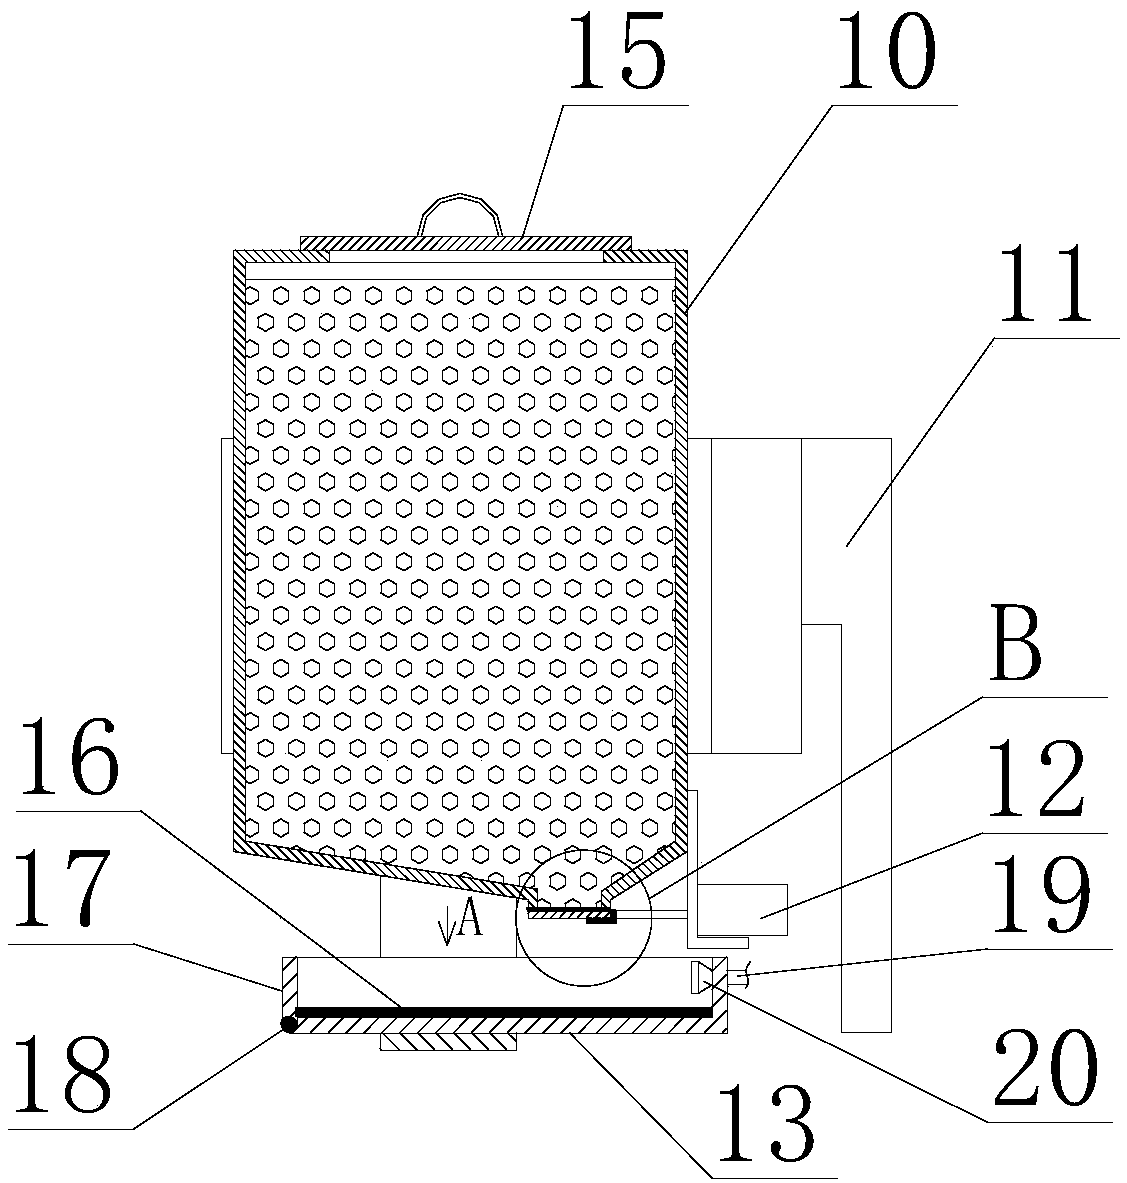 Fish tank with automatic feeding device